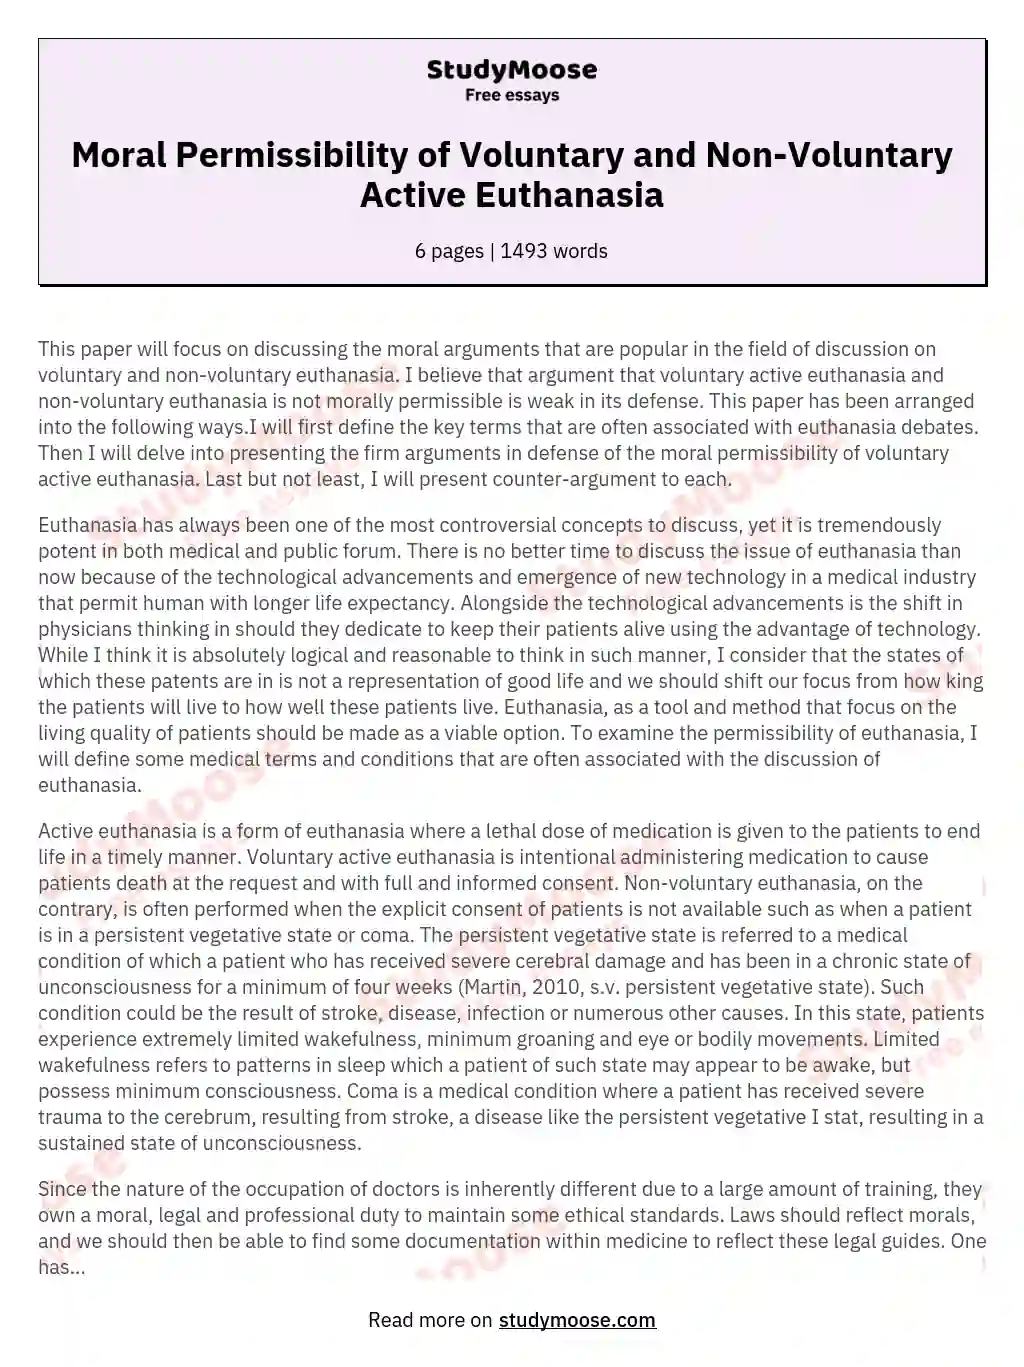 Moral Permissibility of Voluntary and Non-Voluntary Active Euthanasia